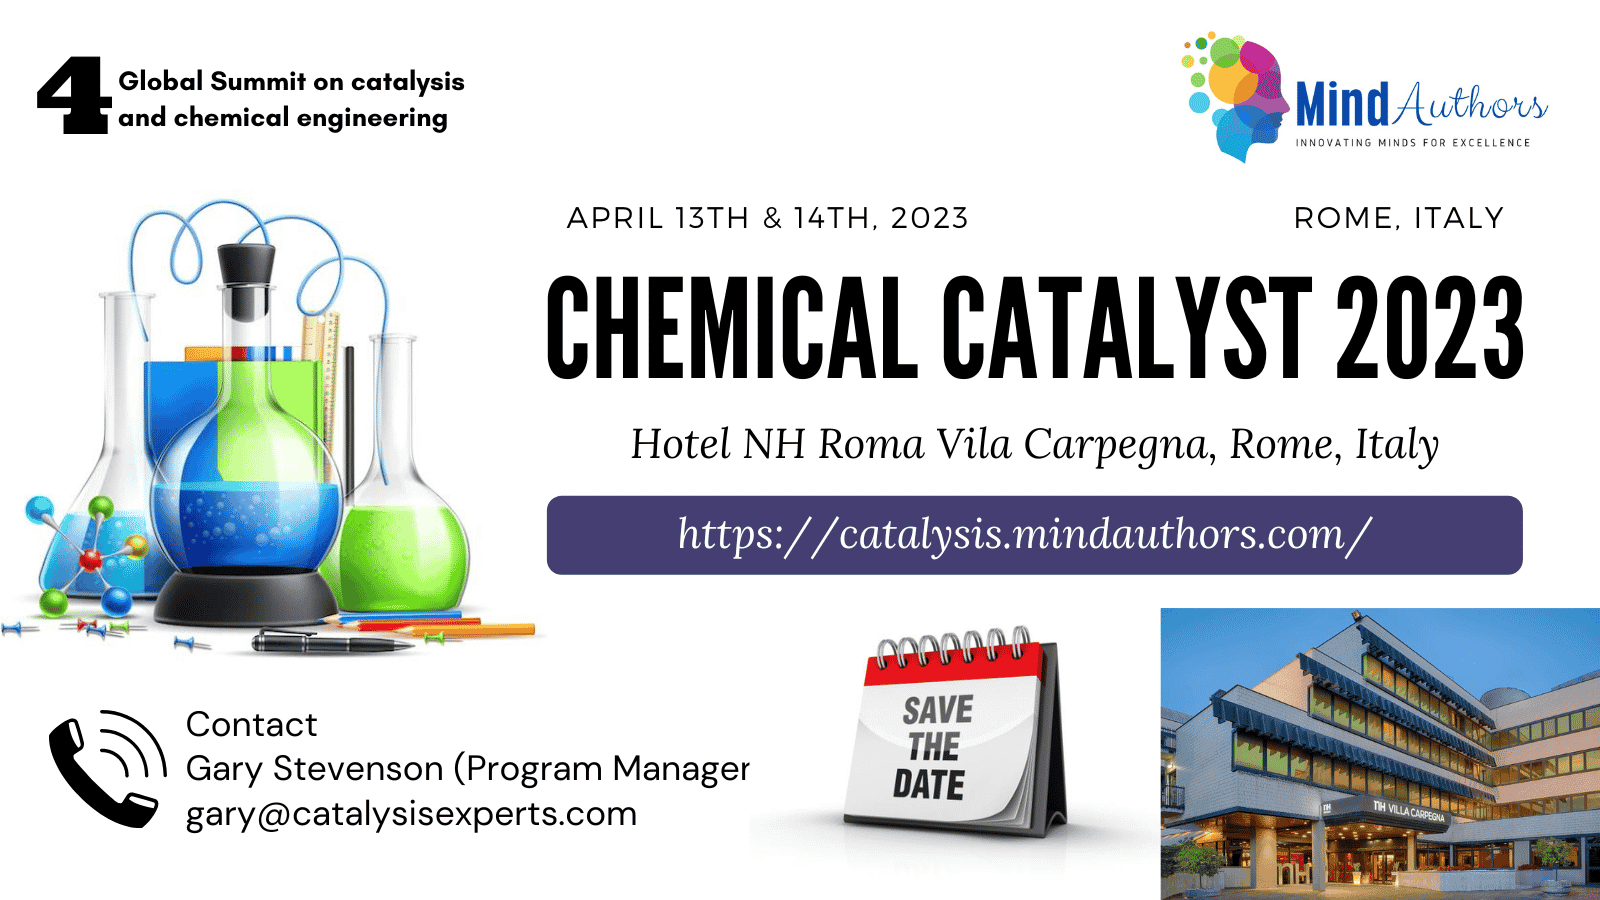 4th Global Summit on catalysis and chemical engineering